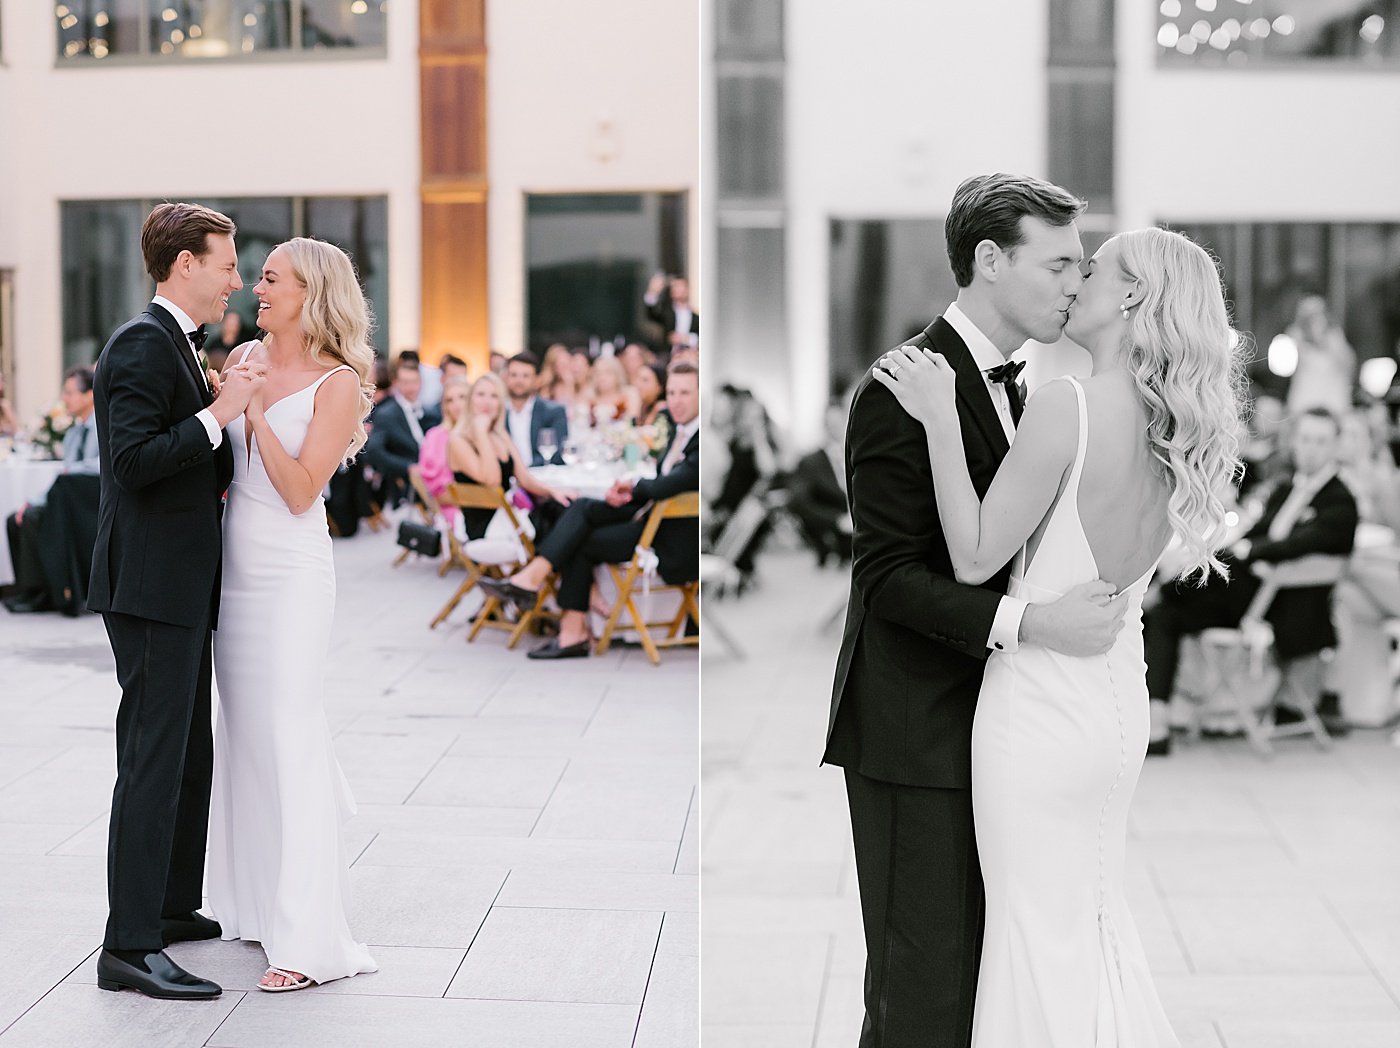 Rebecca Shehorn Photography Haley and Will's Bottleworks Indy Hotel Wedding-807.jpg